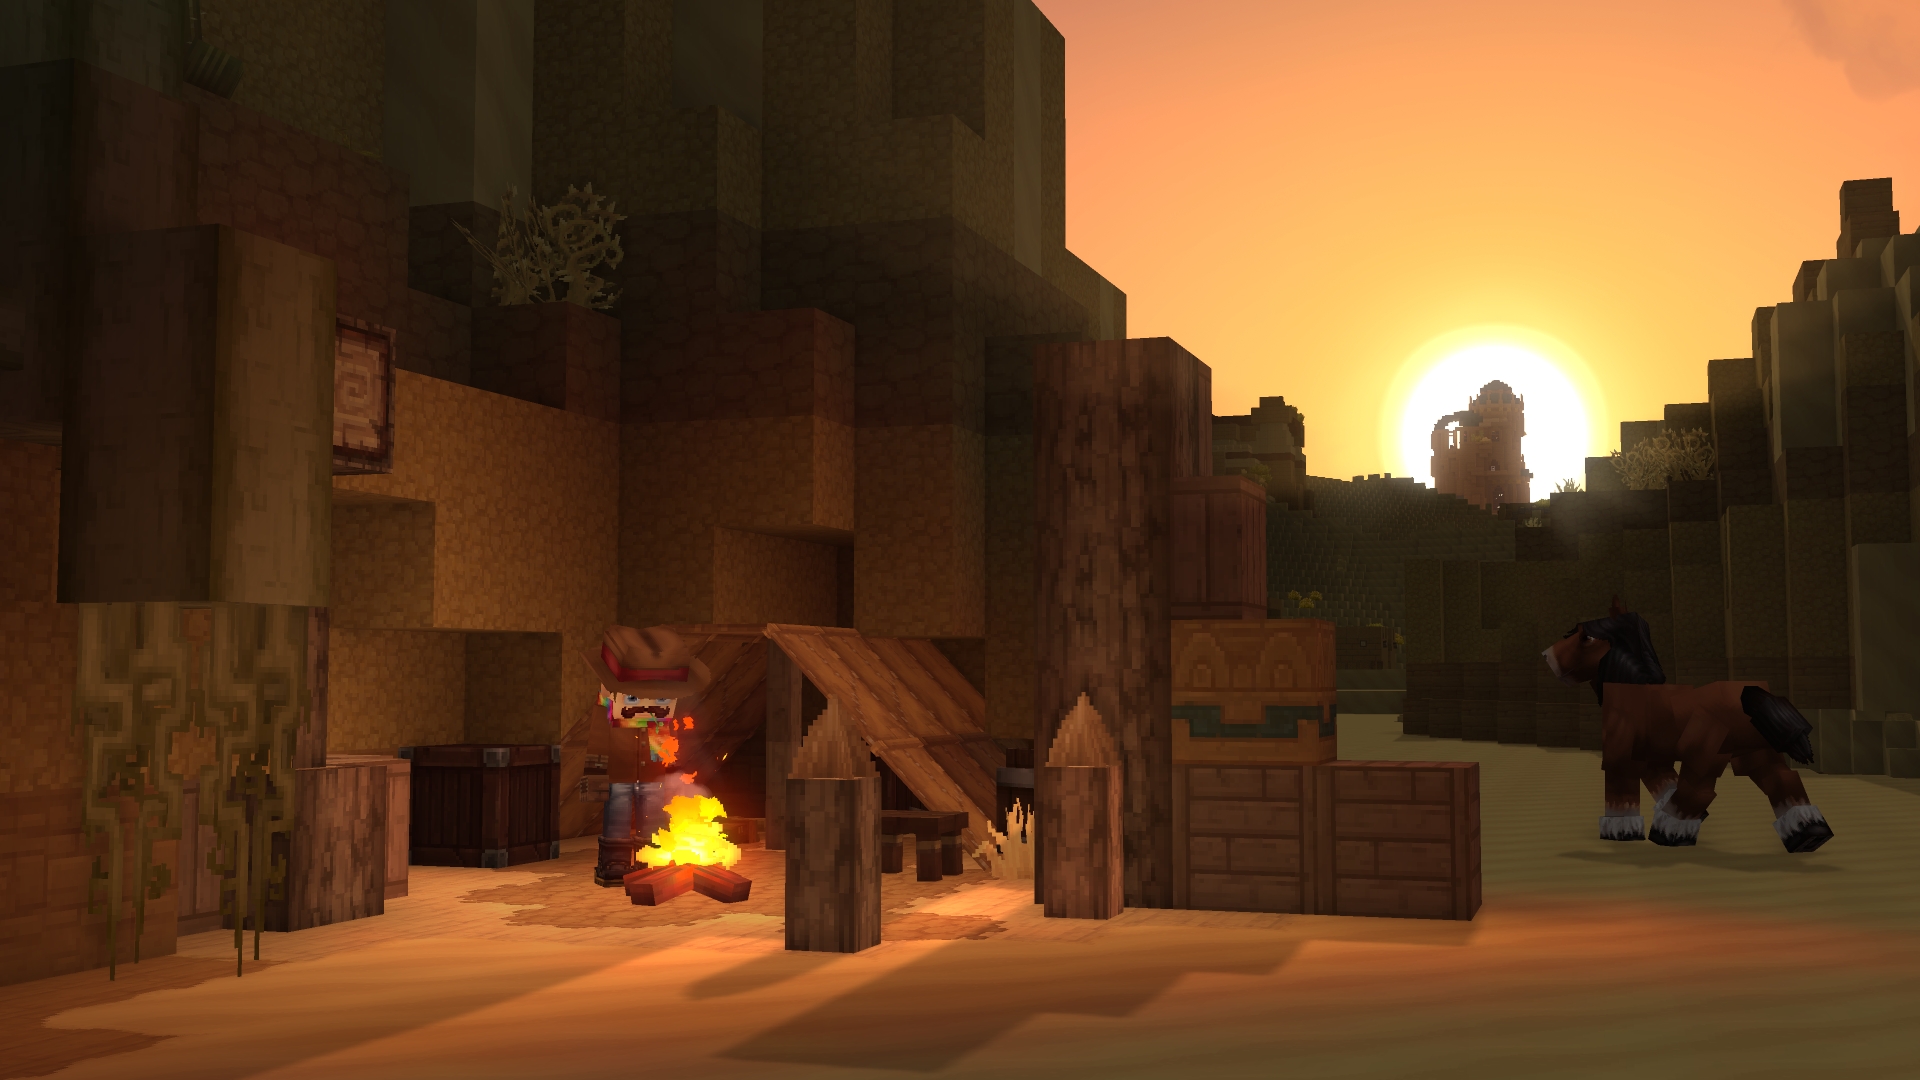 An in-development image of blocky RPG Hytale from July 2021.